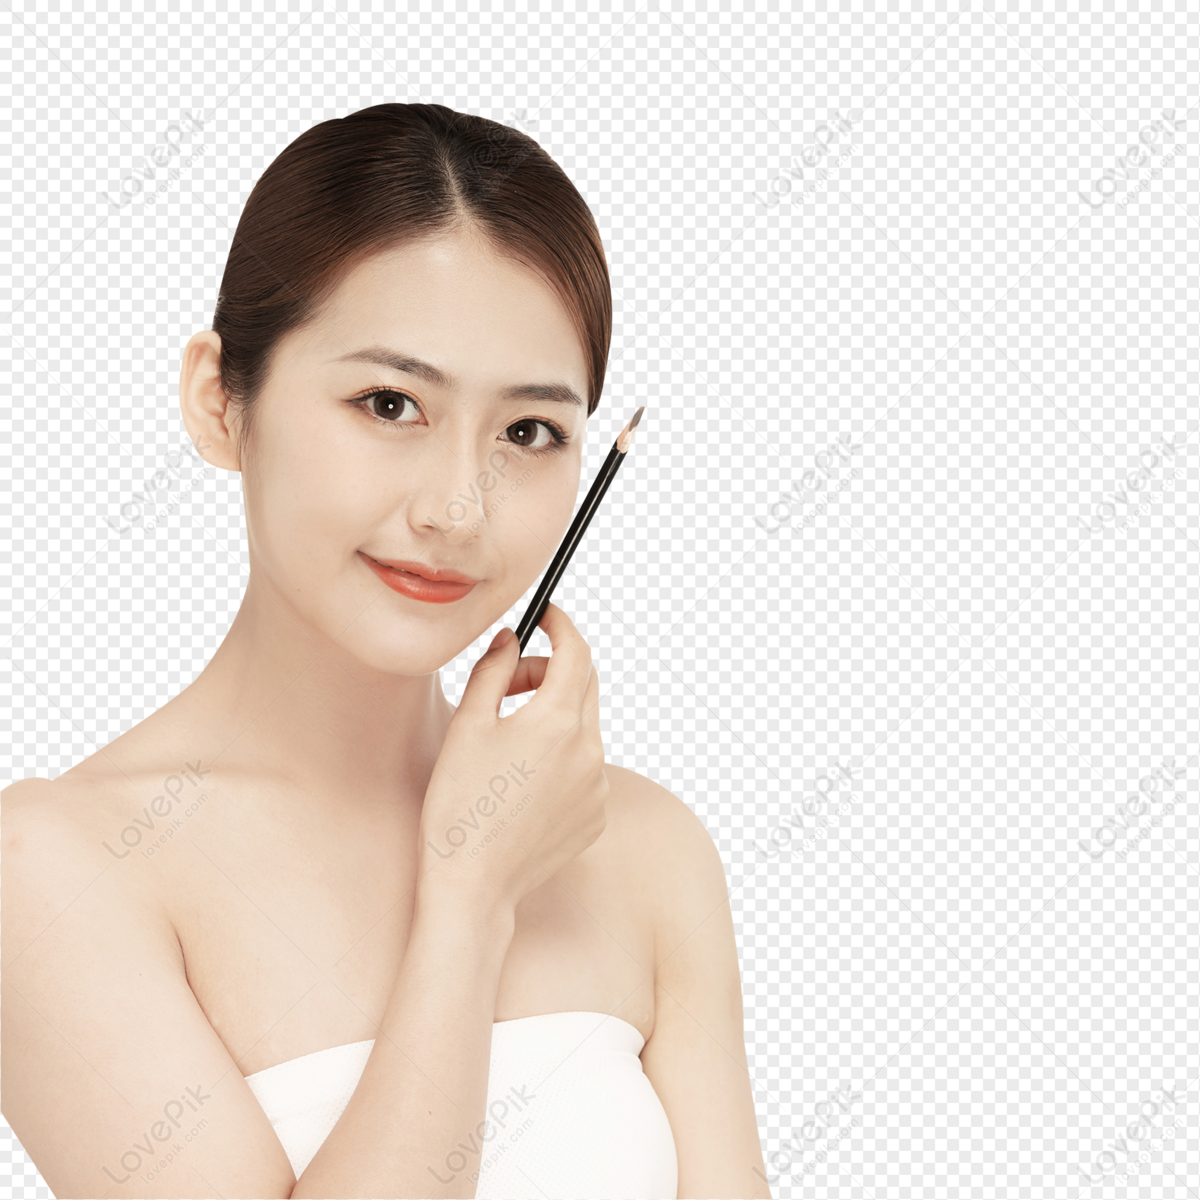 female-using-eyebrow-pencil-png-image-free-download-and-clipart-image